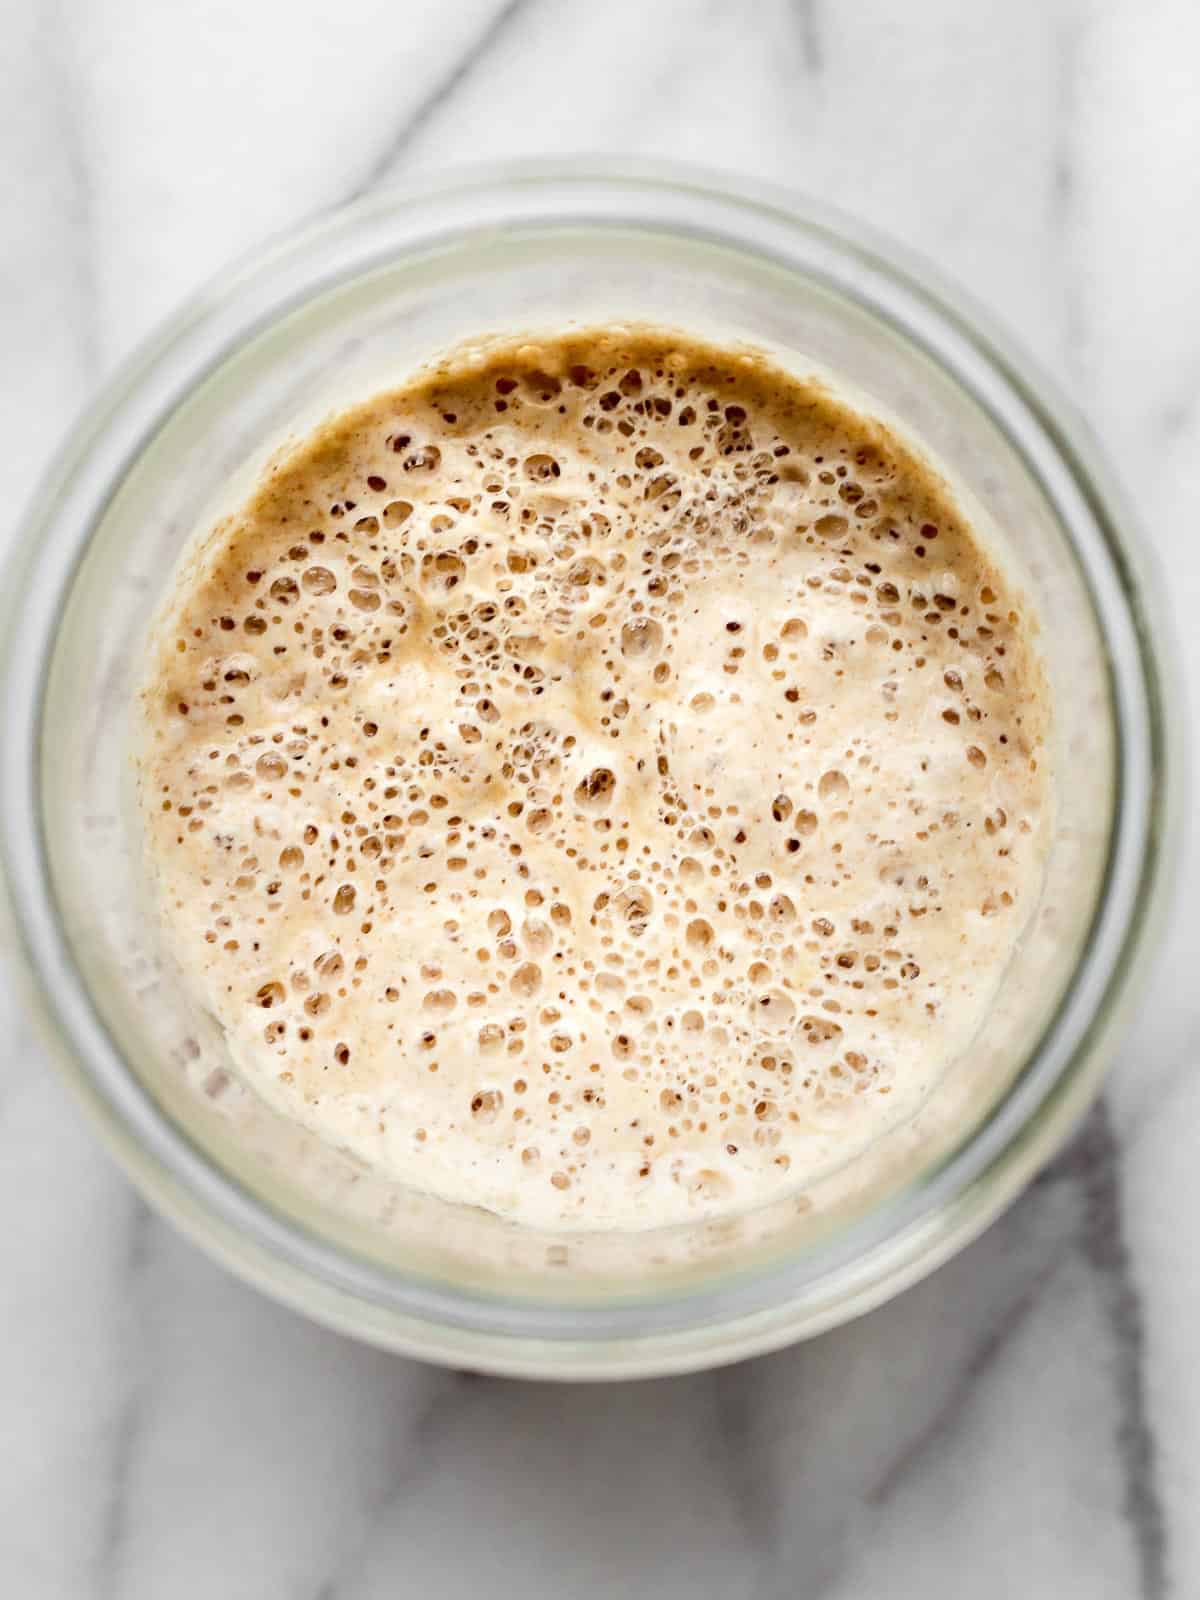 Sourdough starter with a light fluffy texture and lots of bubbles.